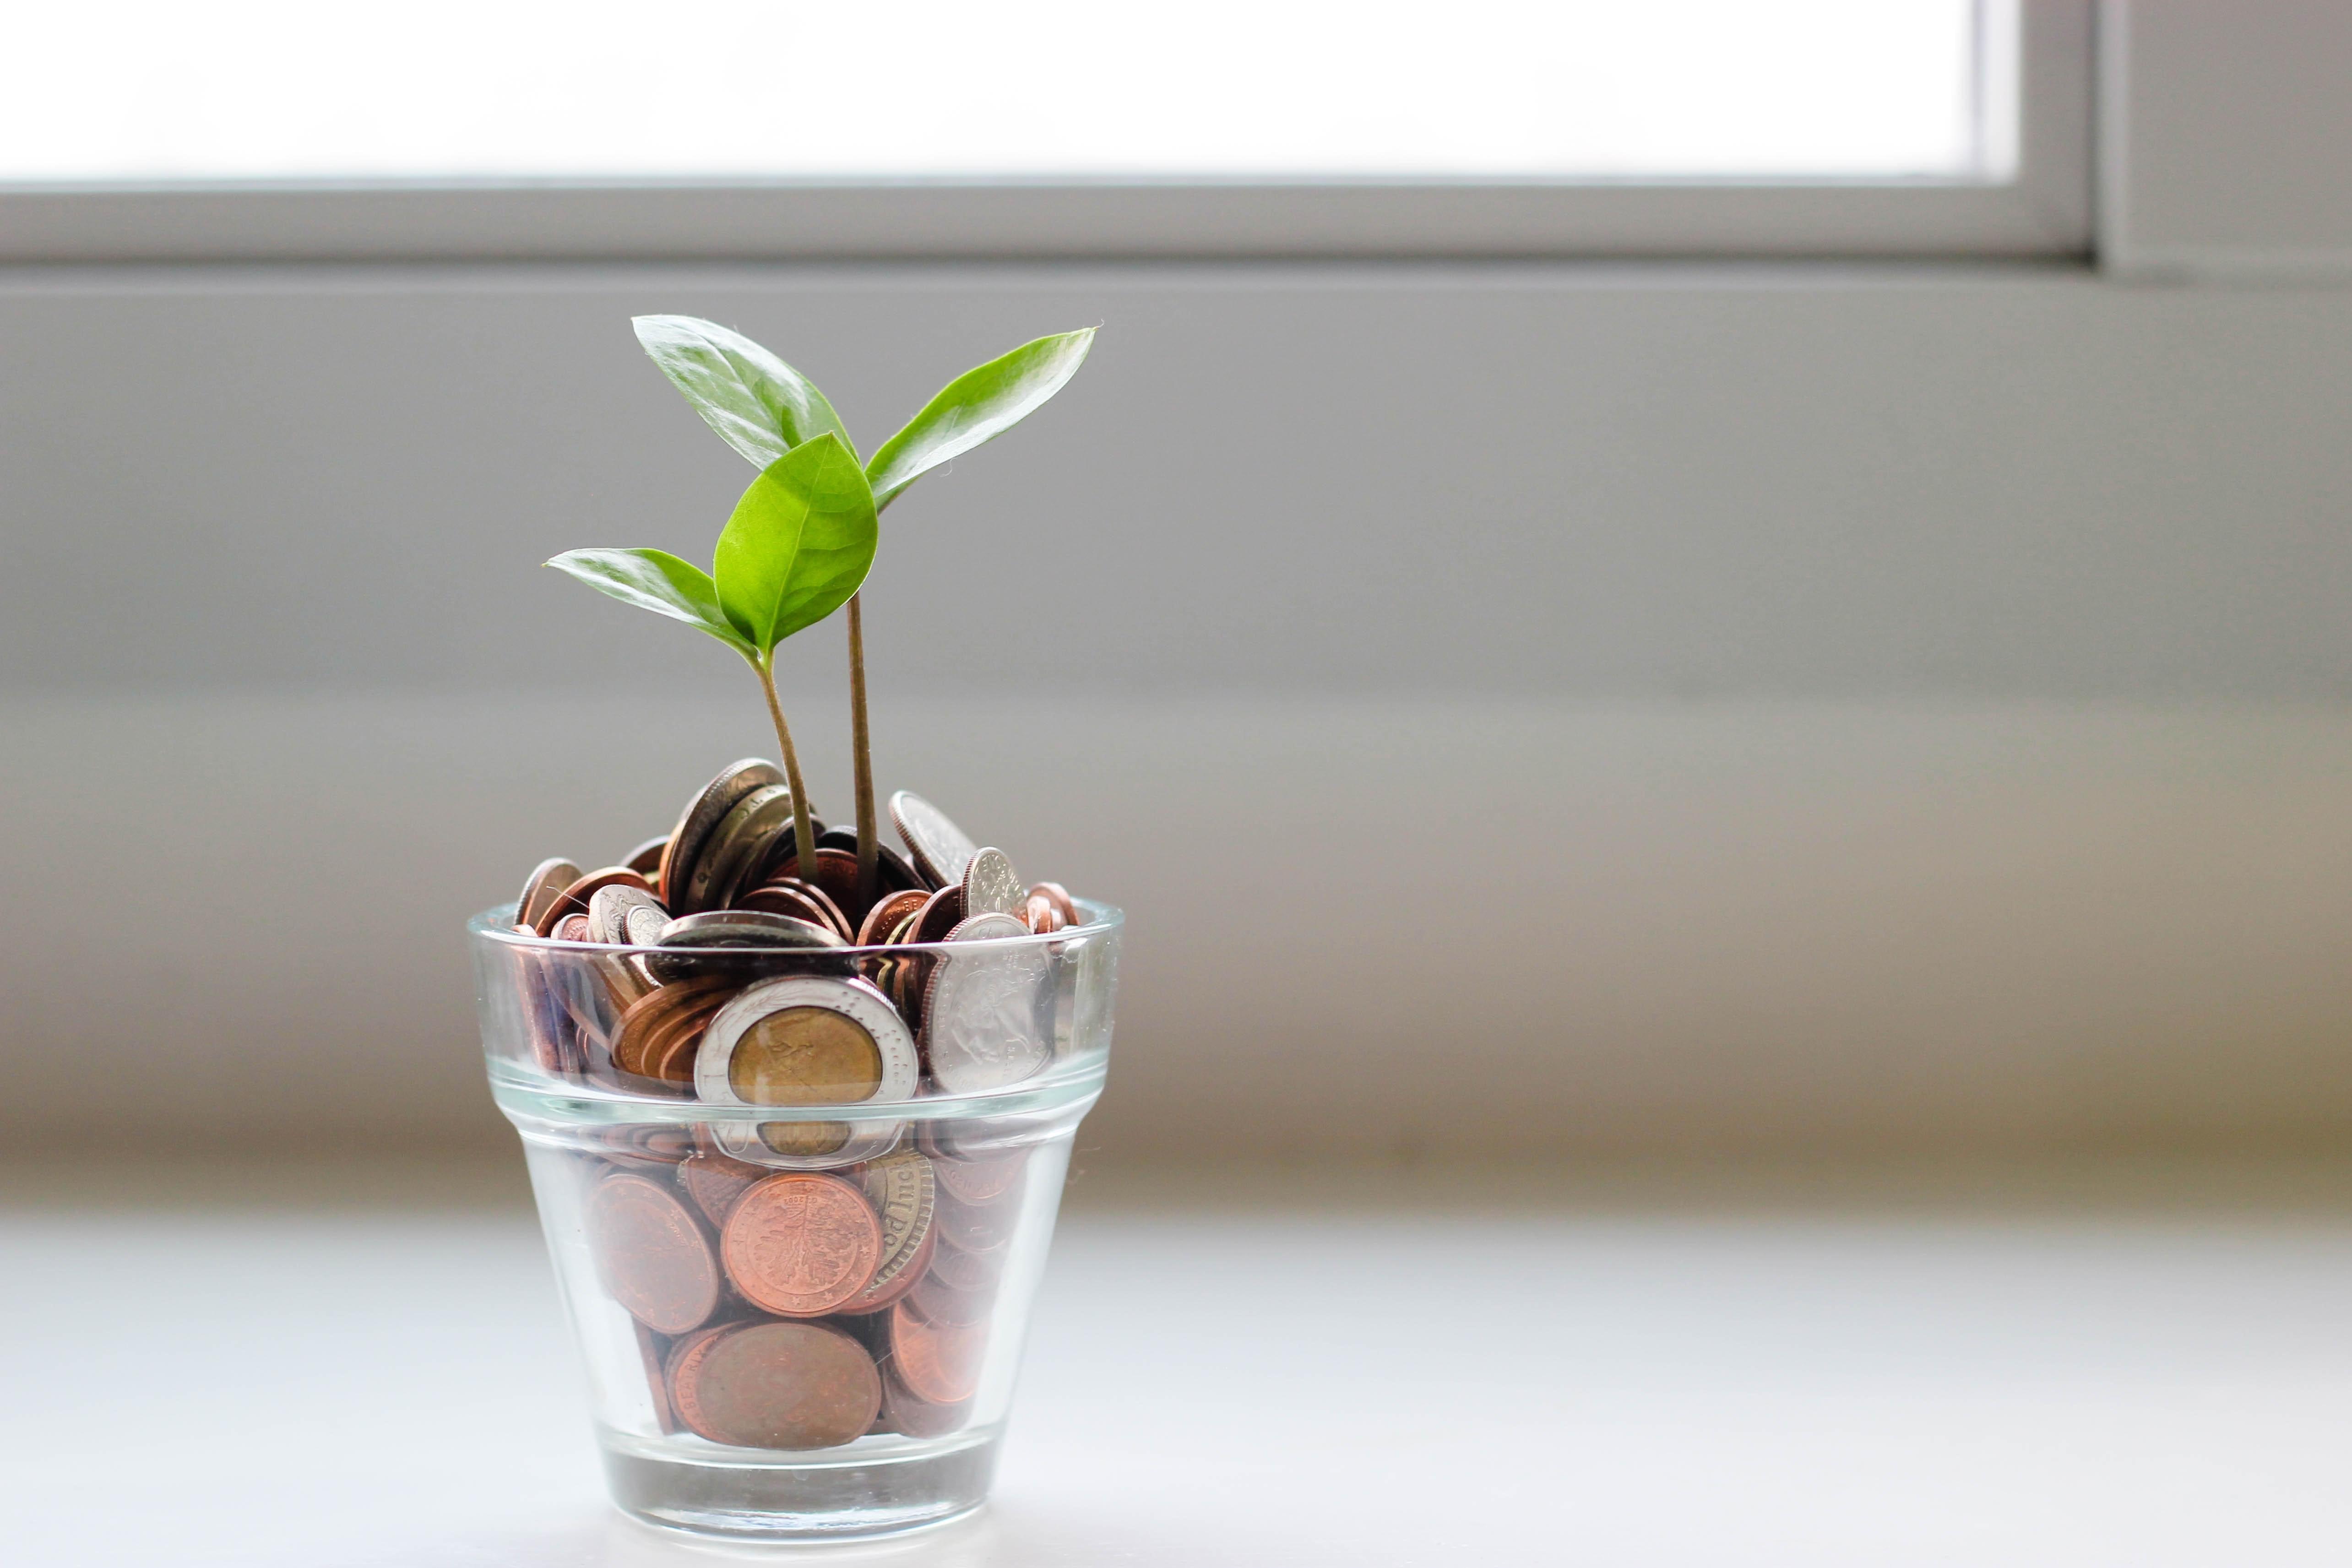 A small glass container filled with U.S. coins with small plants sprouting from them